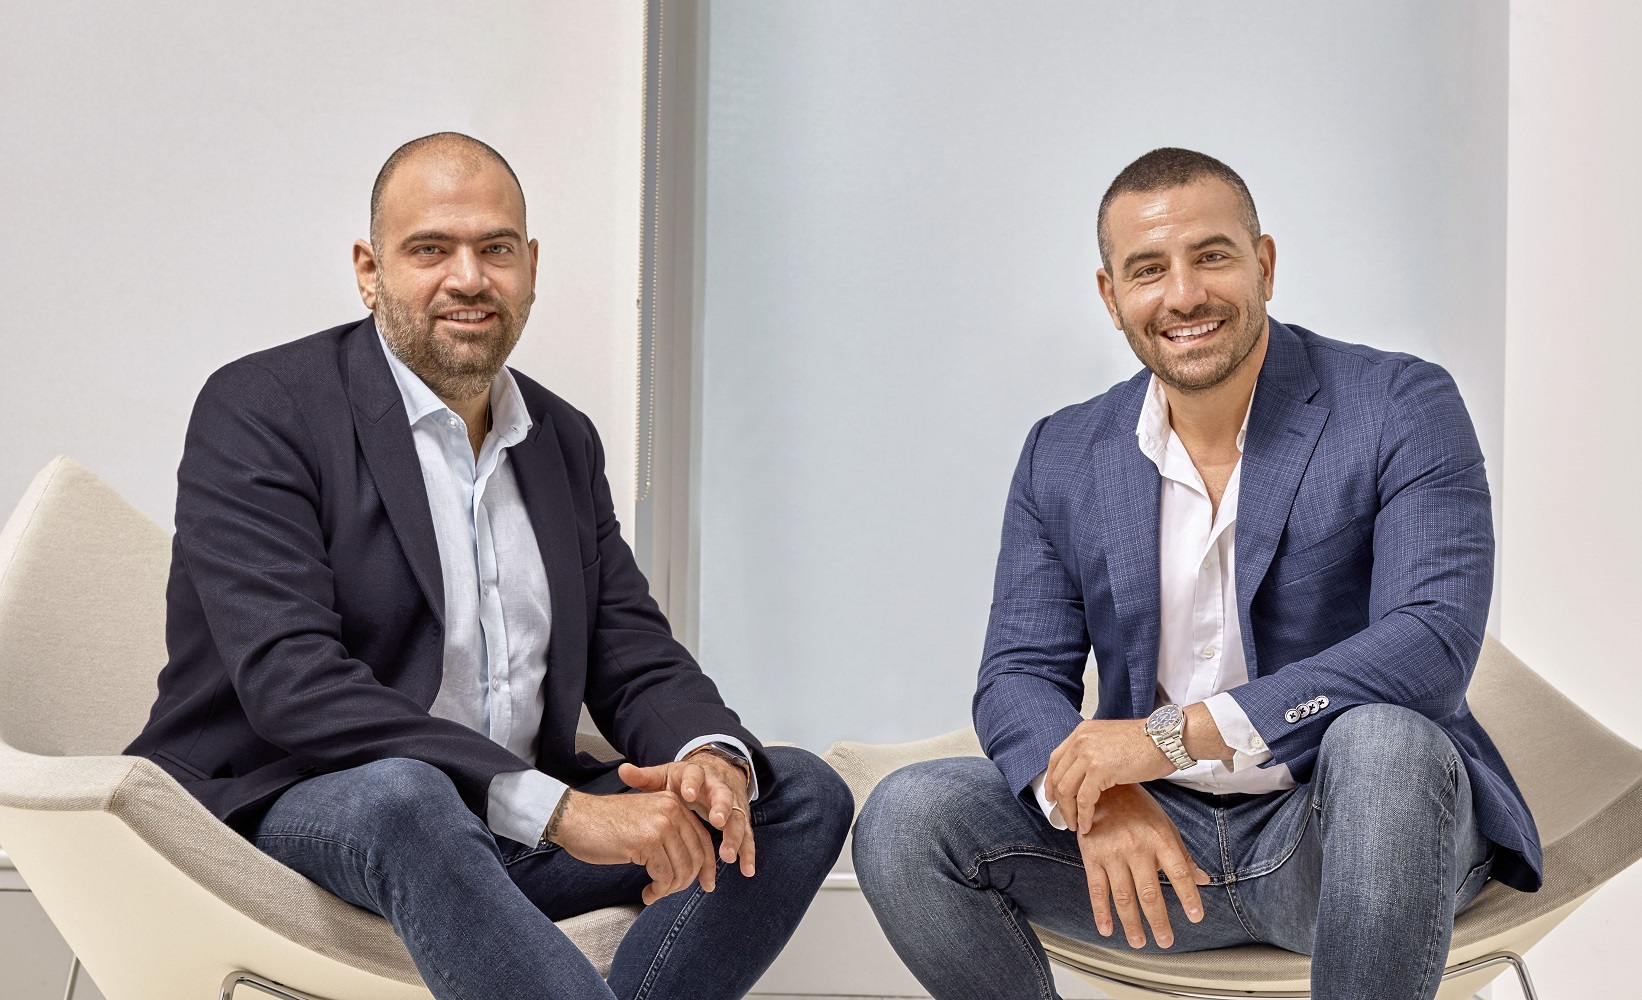 Infiniti Middle East Appoints Publicis Groupe as New Customer Experience Partner